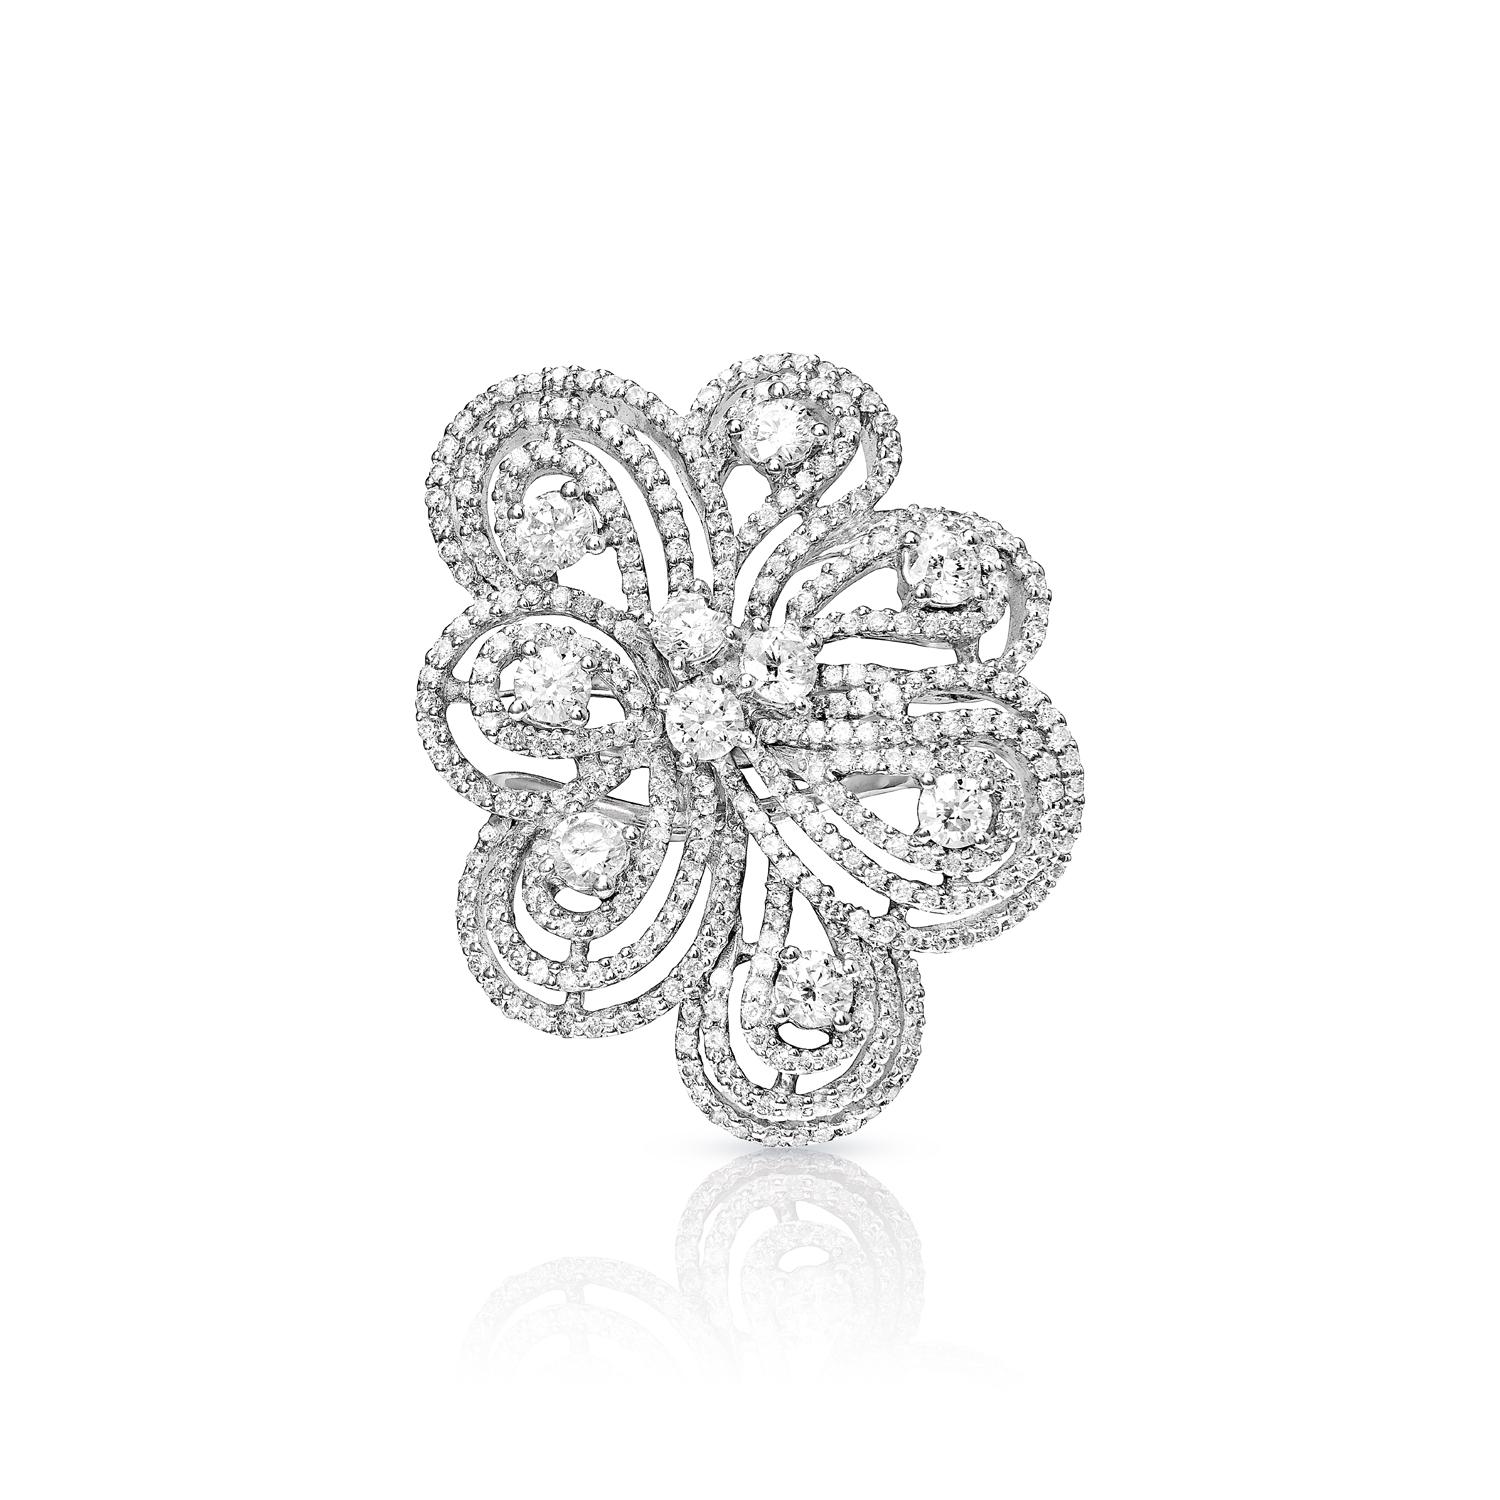 This is the ring of your dreams. It's certified and features earth-mined diamonds that are simply breathtaking. The quality of the diamonds is impeccable, and they are set in a beautiful setting that is chic and stylish.

You'll love wearing this